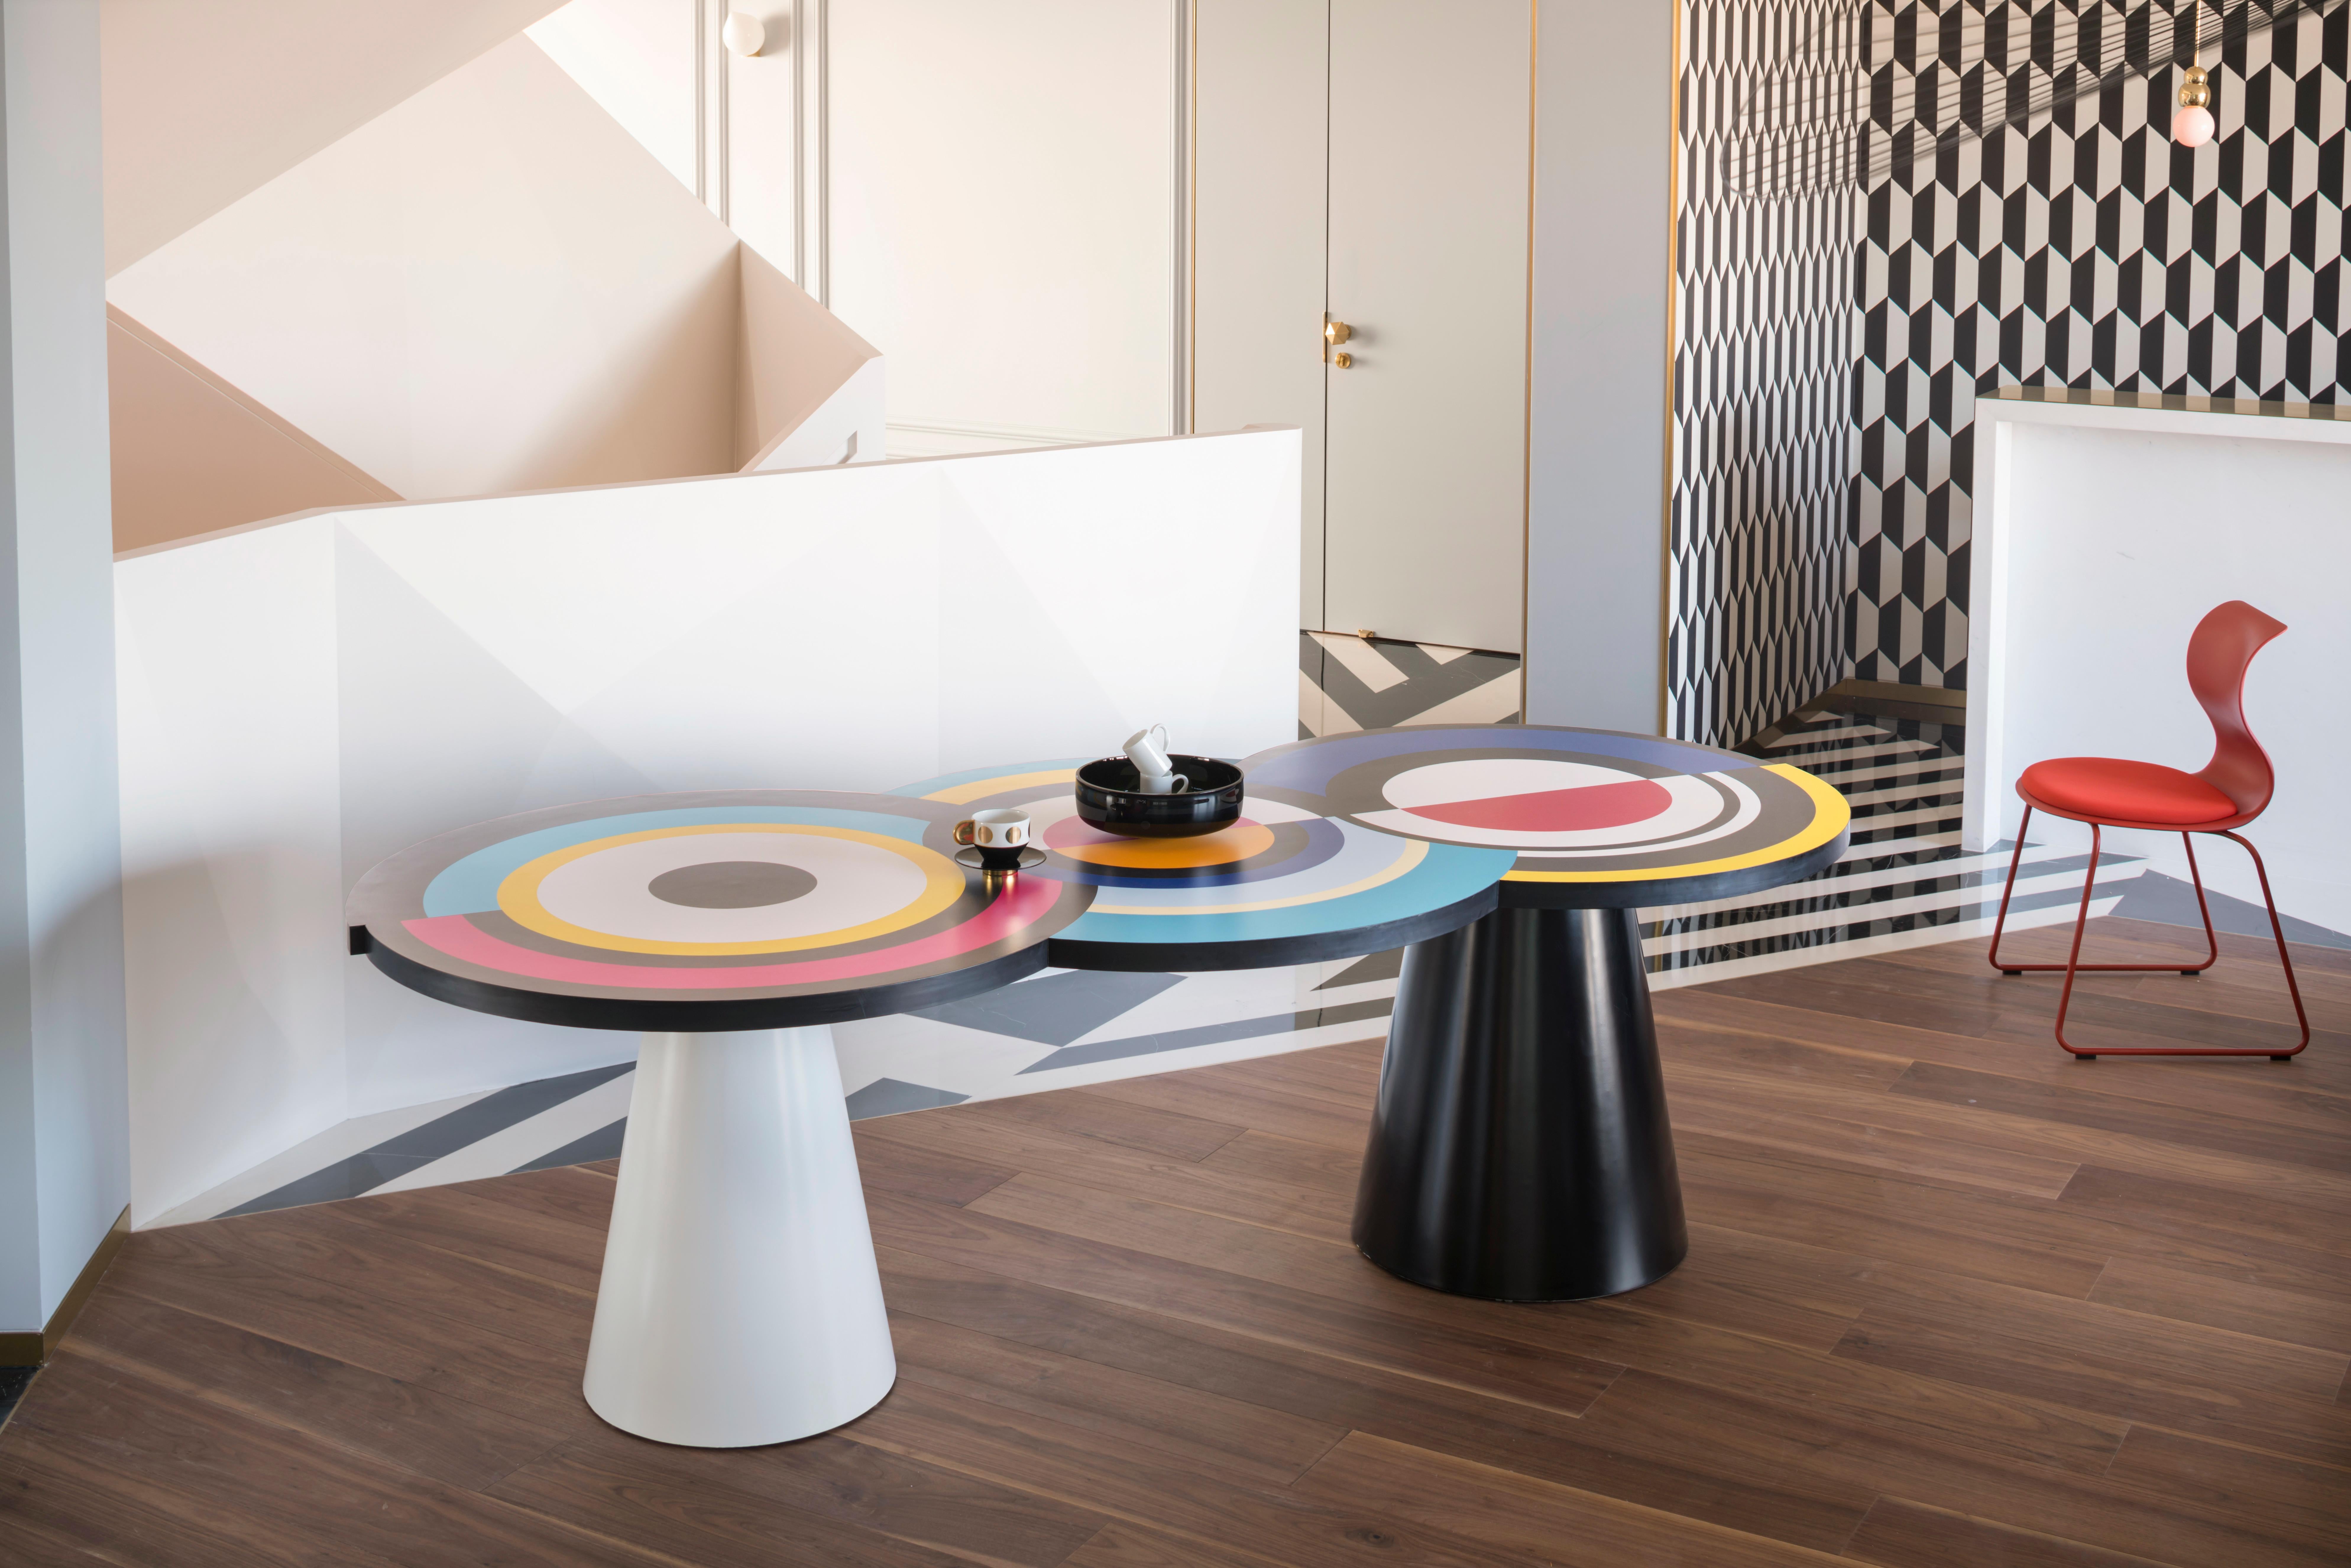 Varnished Sonia et Caetera Dining Table M2 Designed by Thomas Dariel